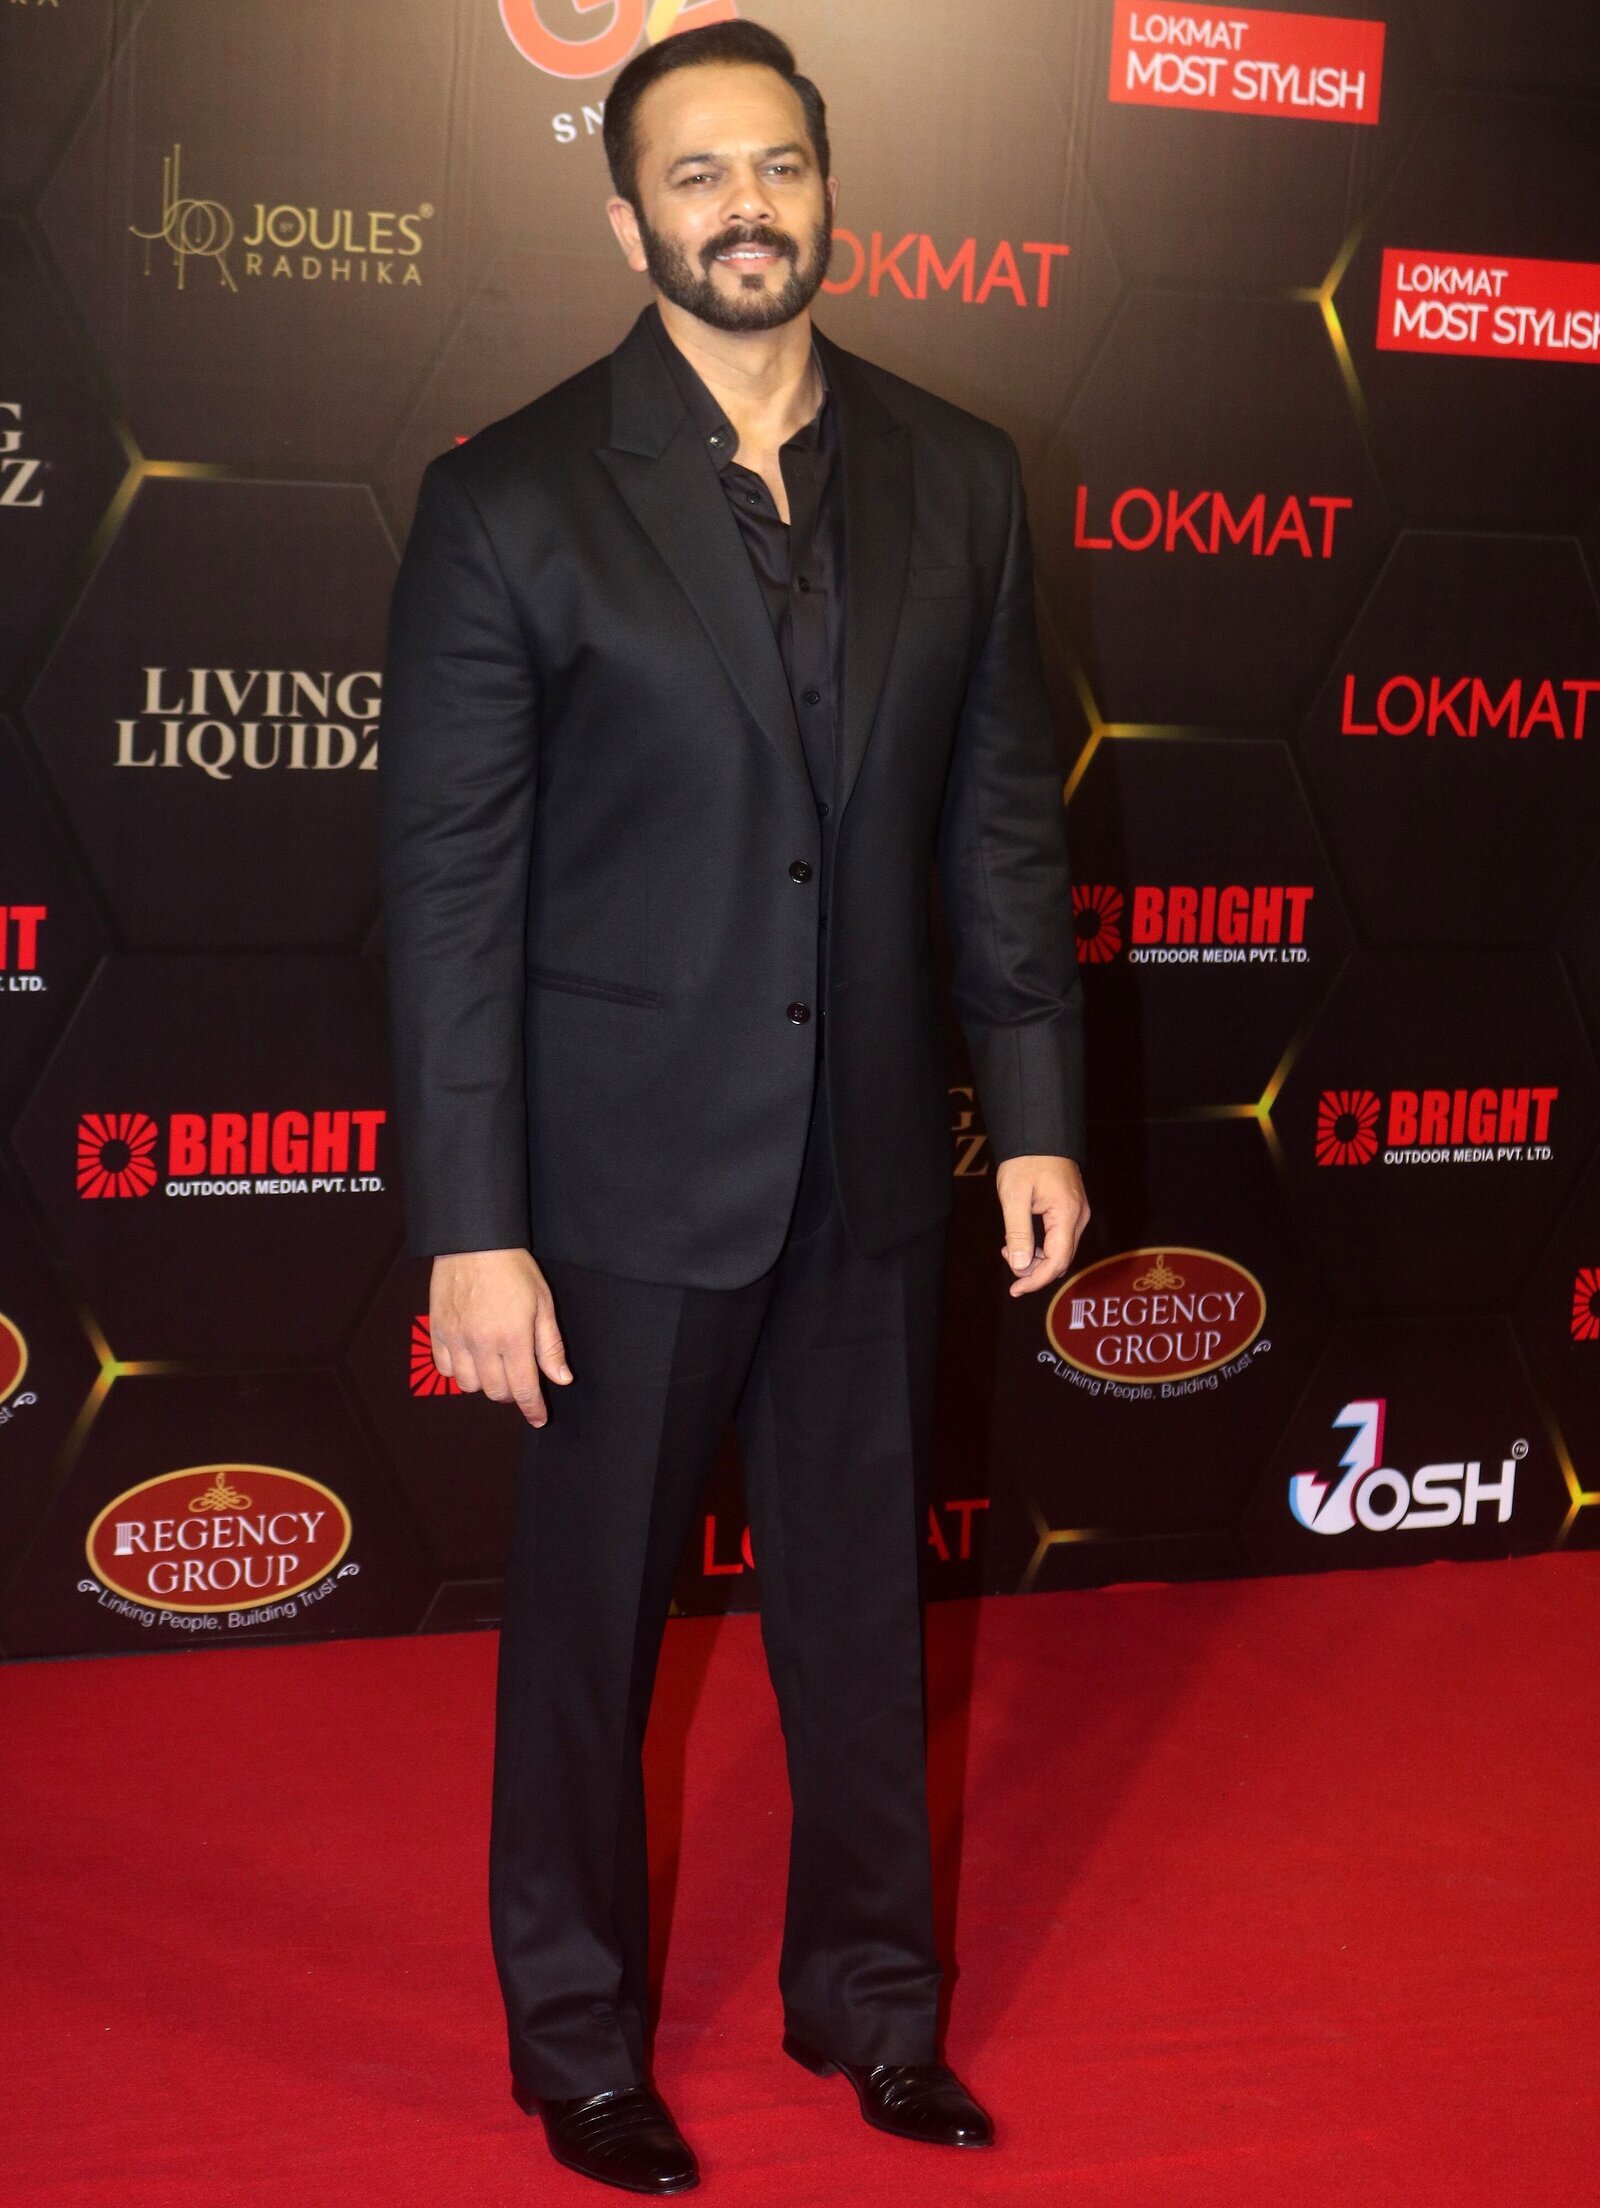 Rohit Shetty - Photos: Celebs At The Lokmat Most Stylish Awards 2021 | Picture 1845763